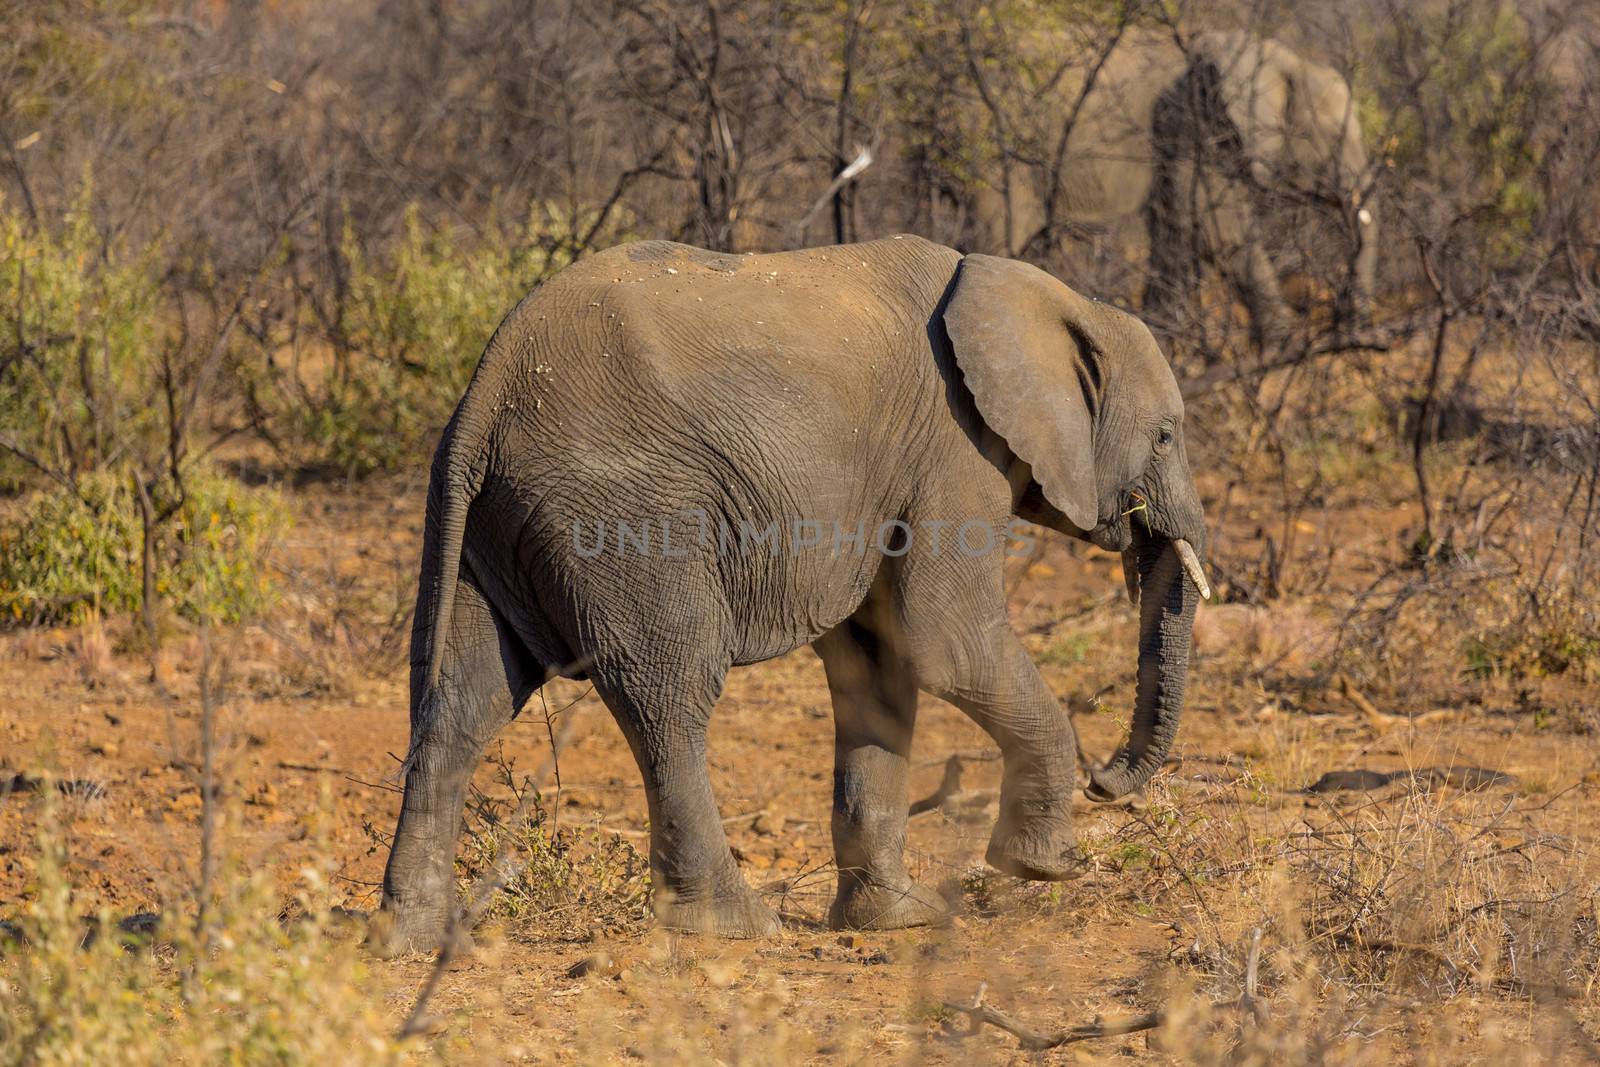 A very yount elephant wandering in the grasslands of South Africa's Pilanesberg National Park